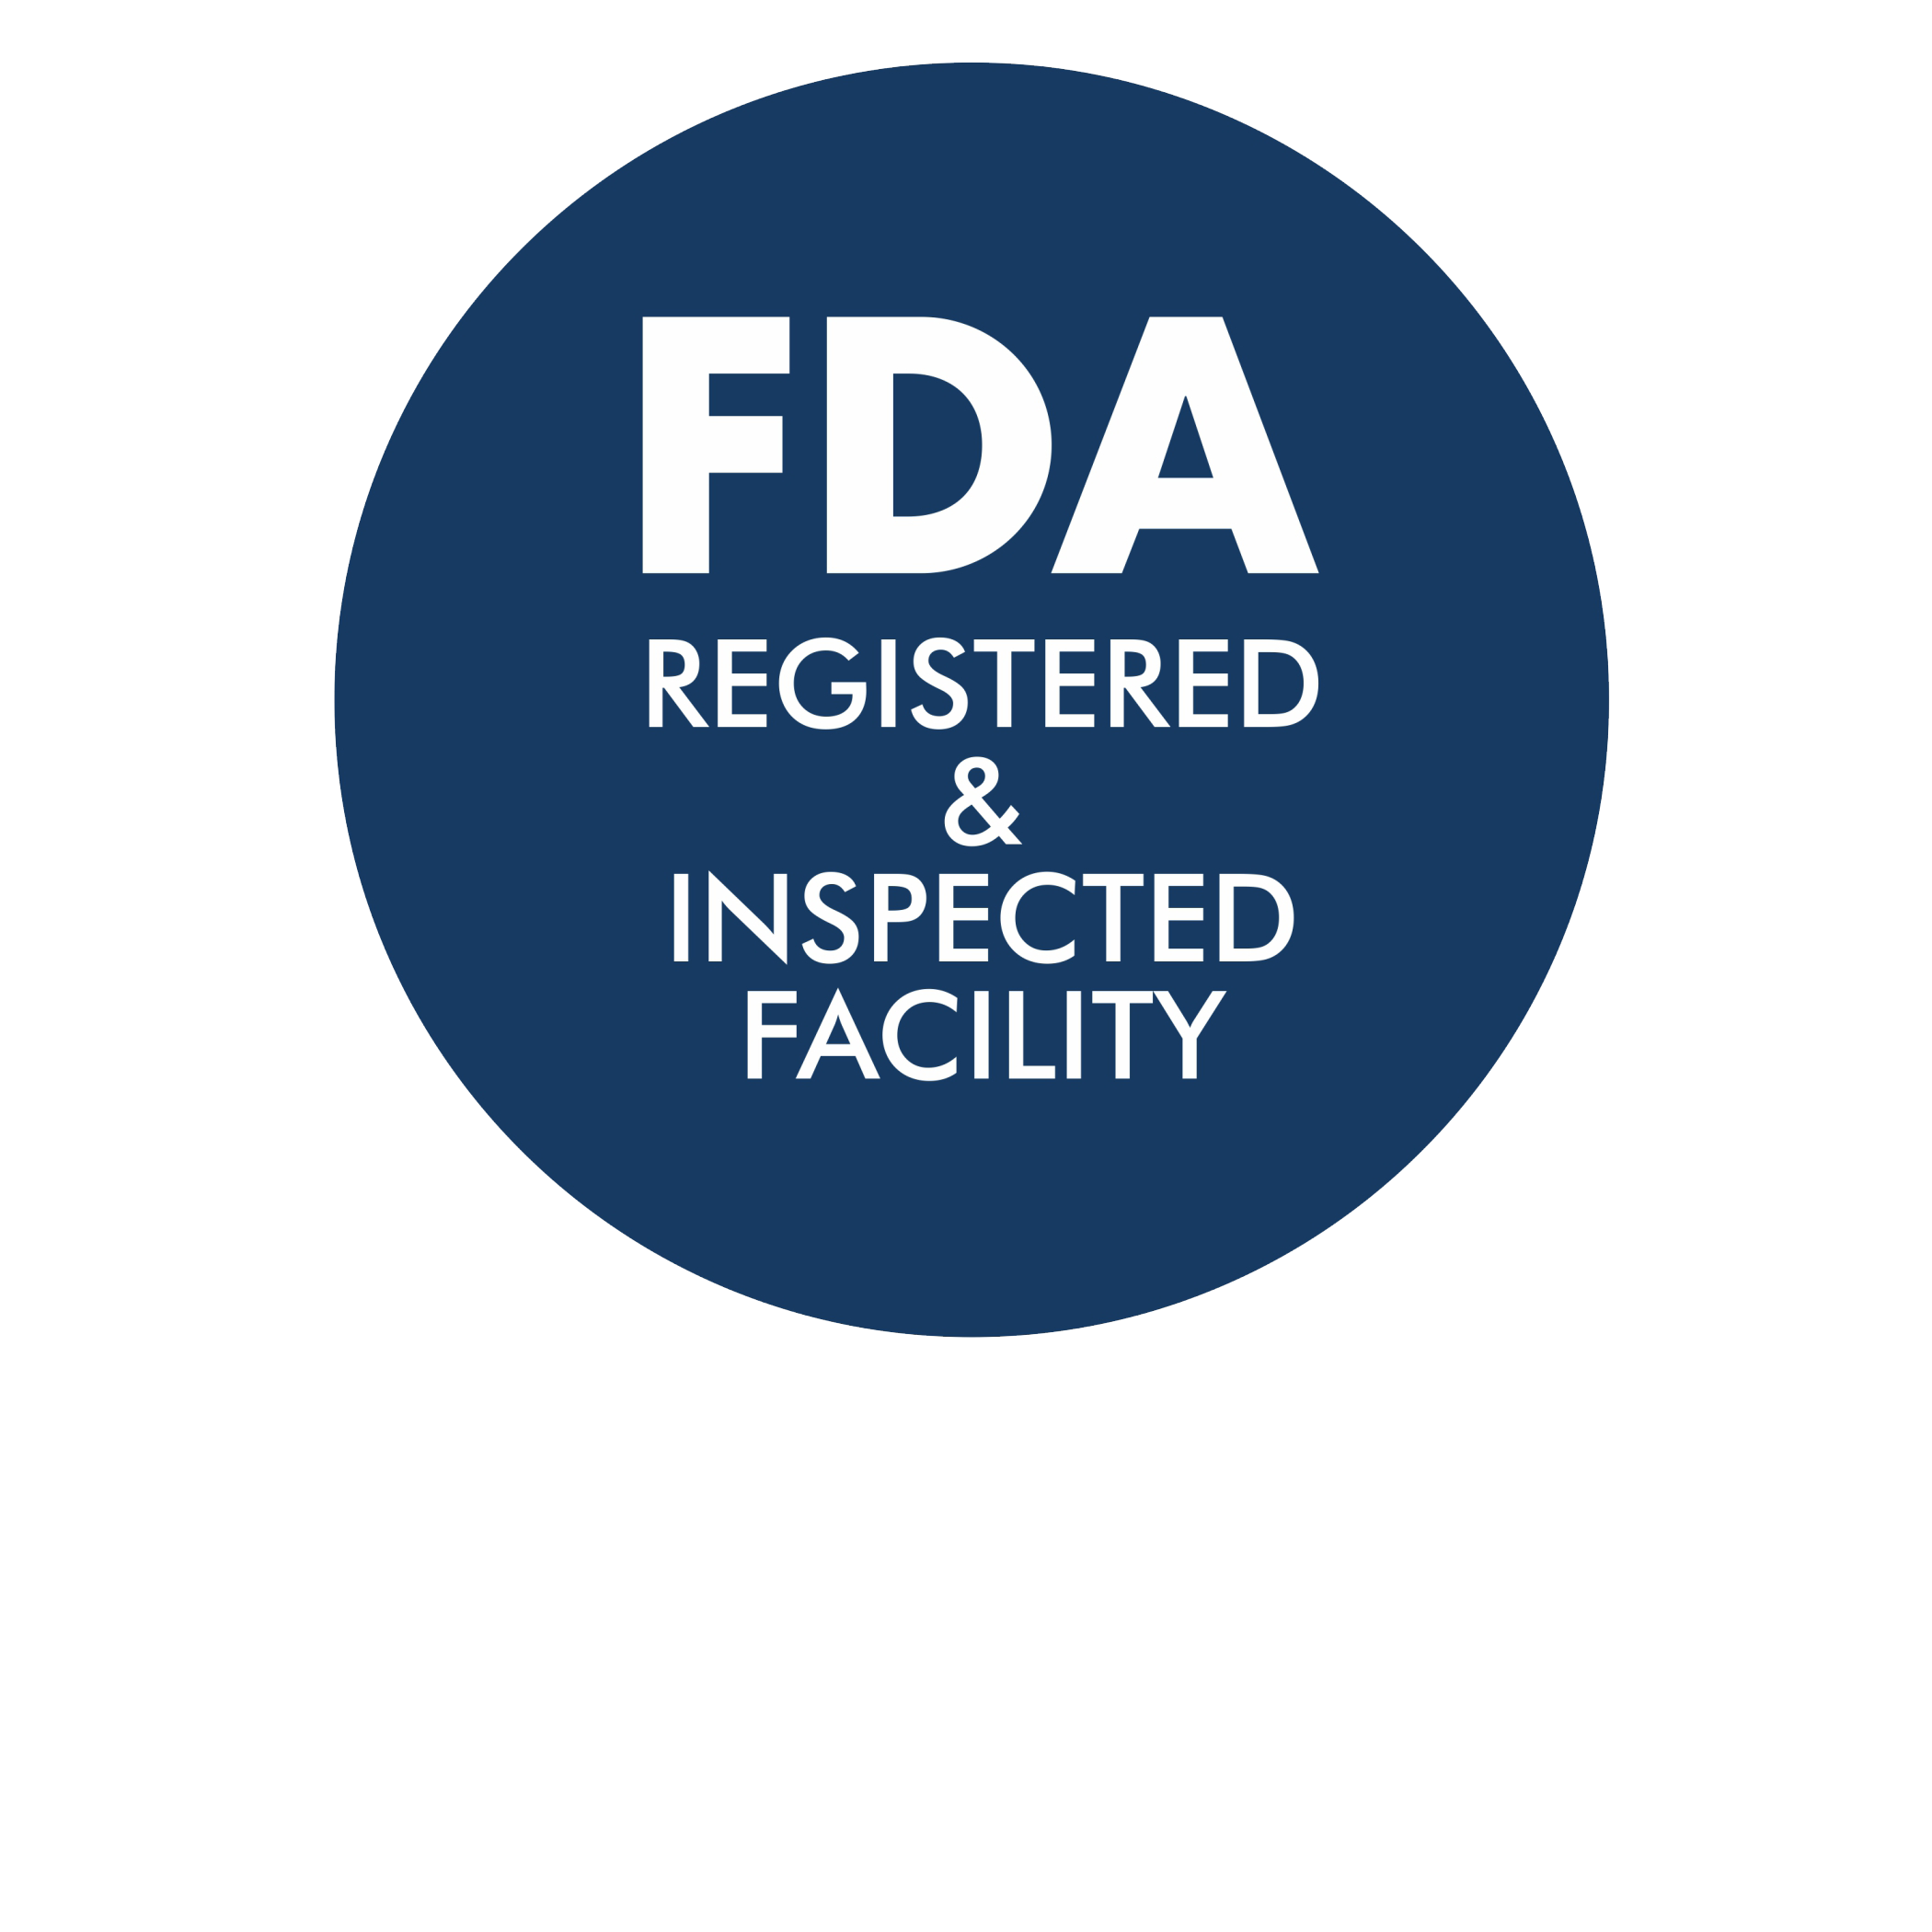 FDA registered and inspected facility seal